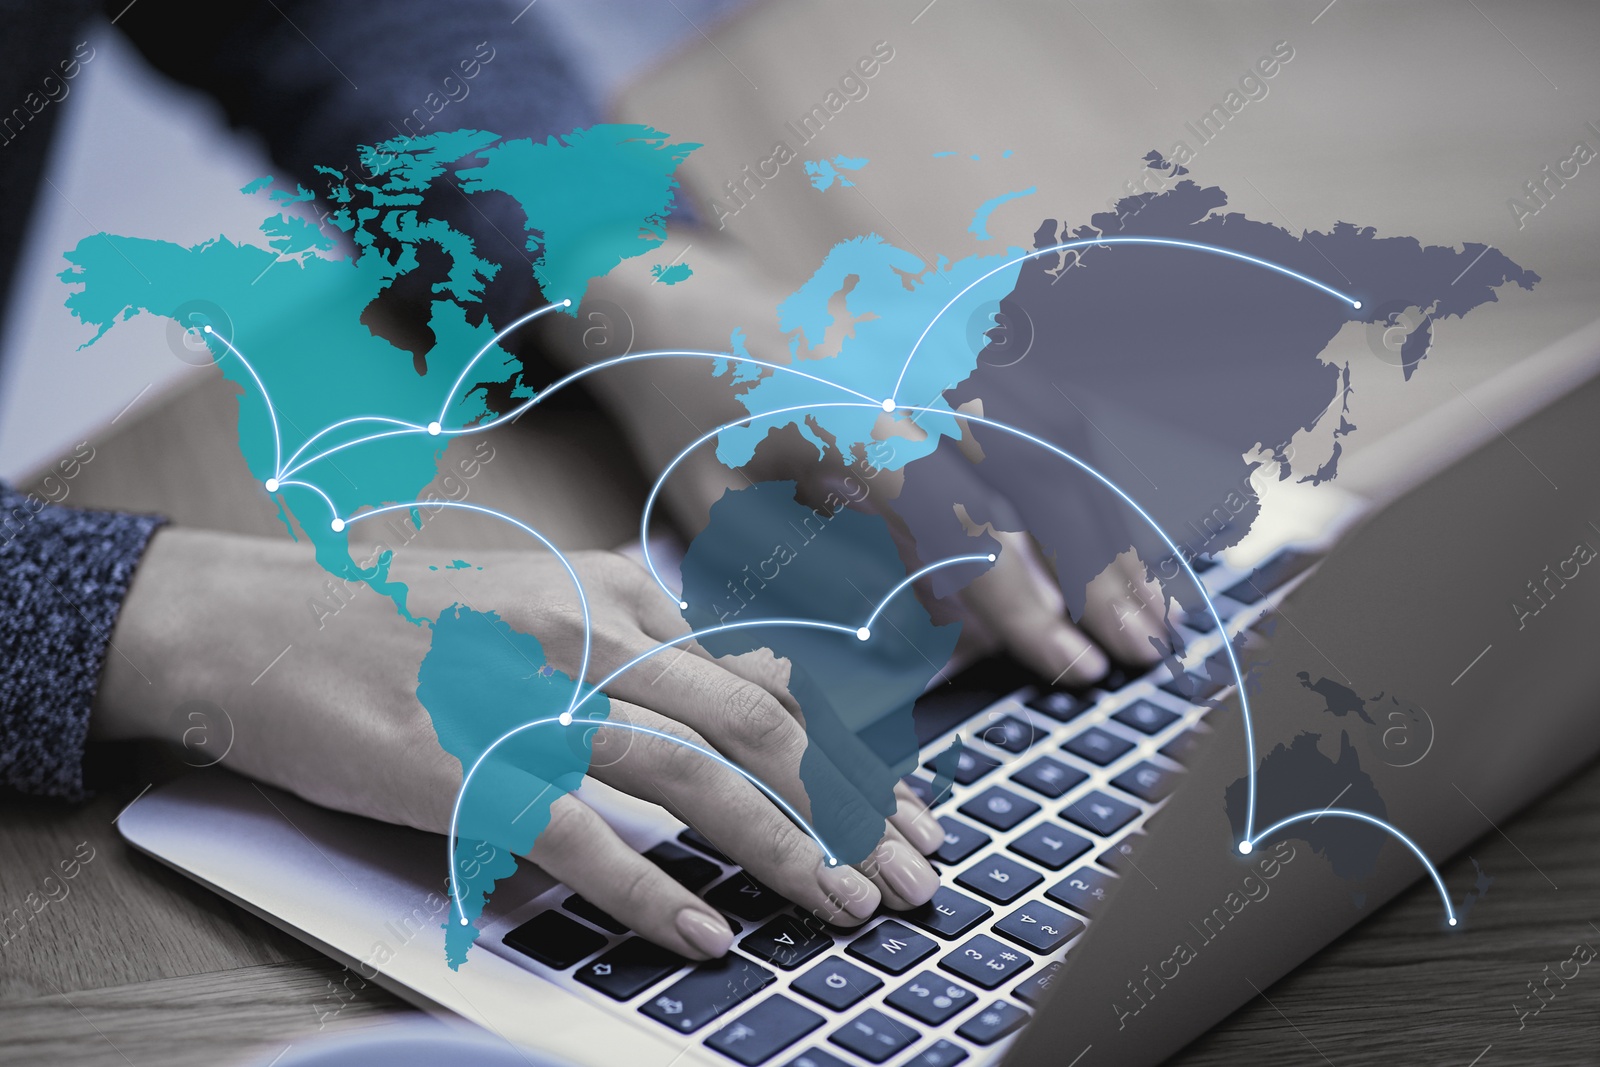 Image of Wholesale and logistics concept. Woman using laptop in office, world map illustration on foreground